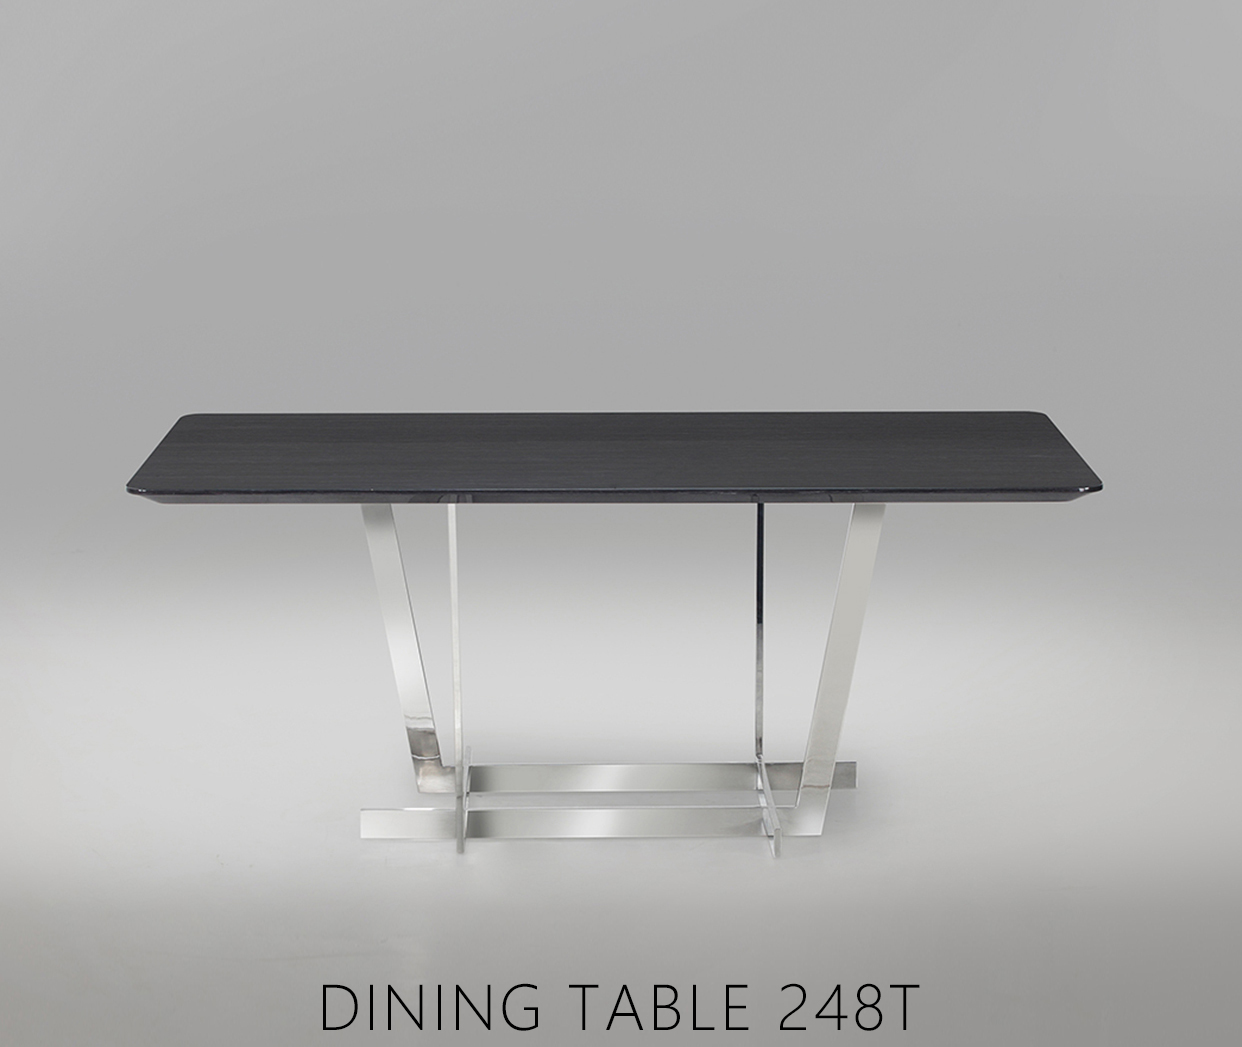 DINING TABLE 248T